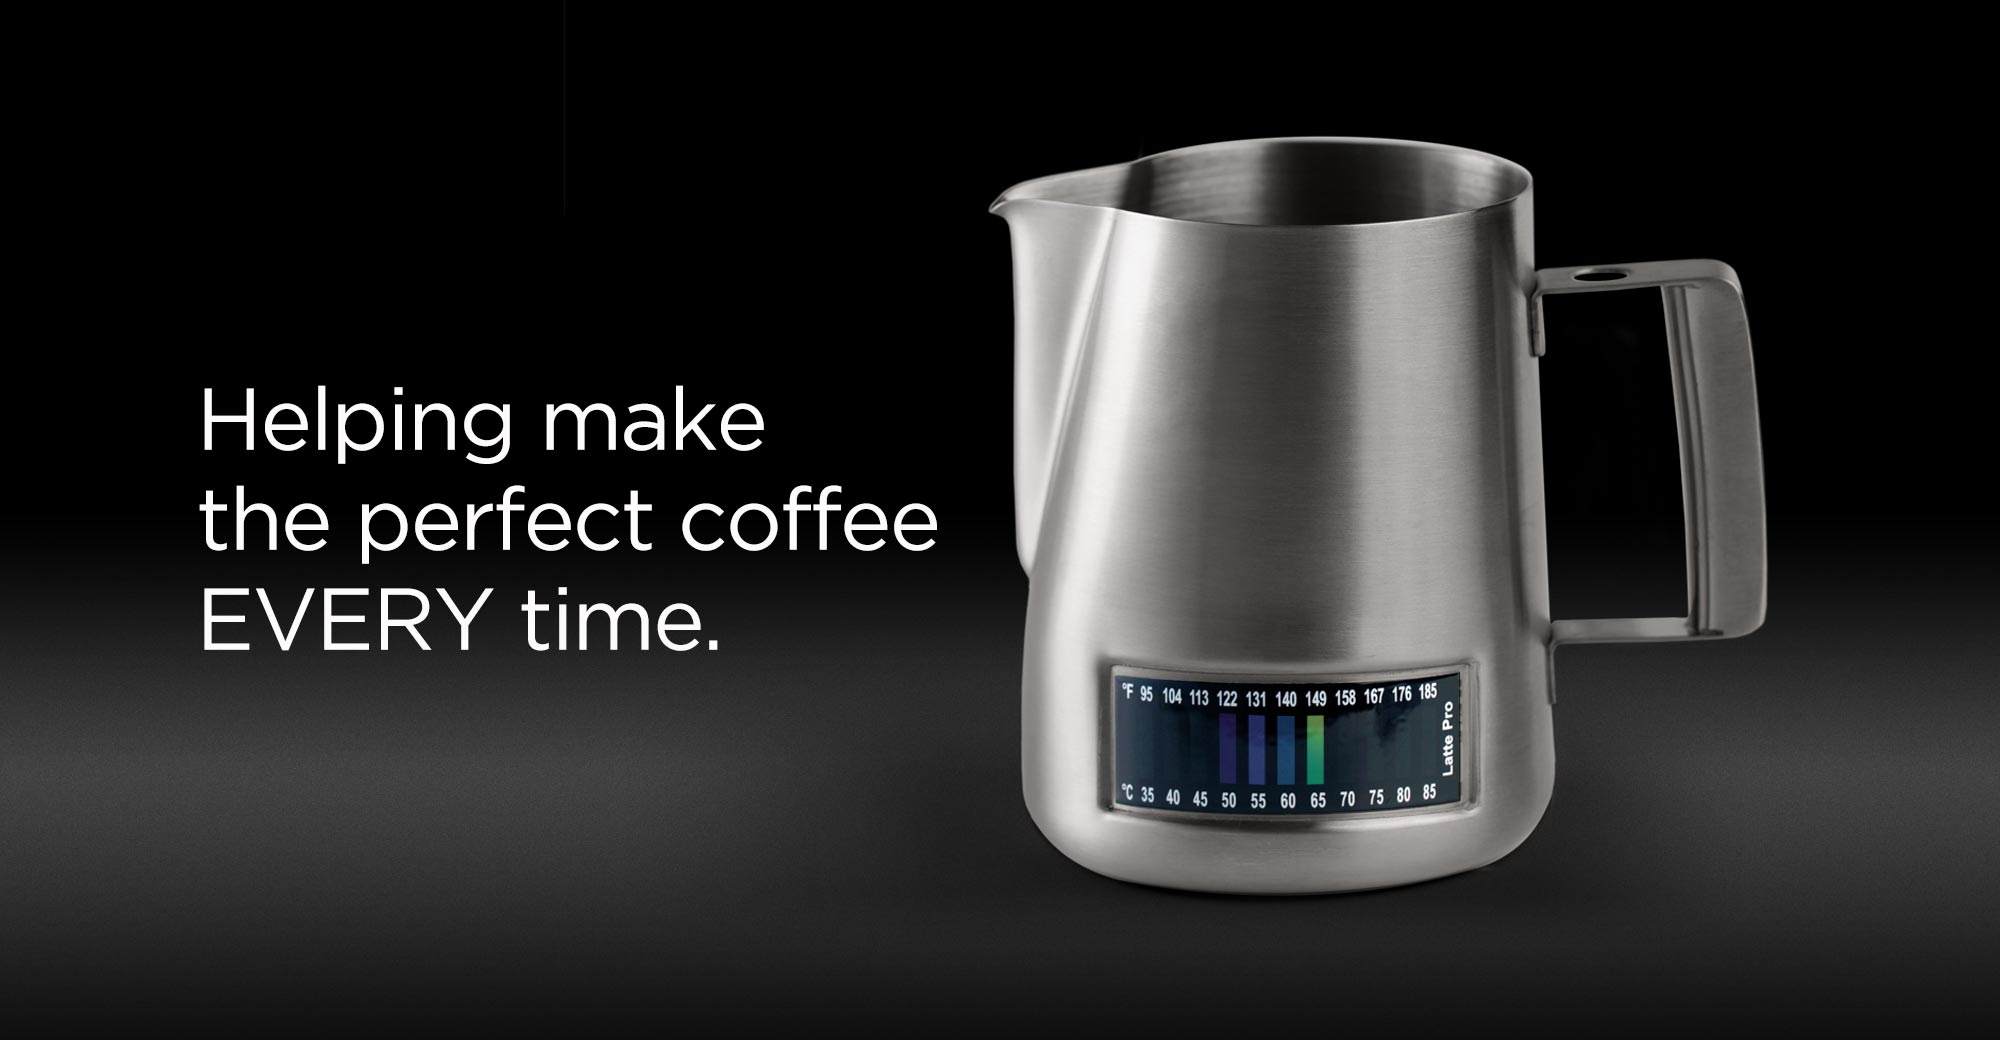 Why the Latte Pro Milk Jug with Built-in Thermometer is a Must-Have for Coffee Lovers